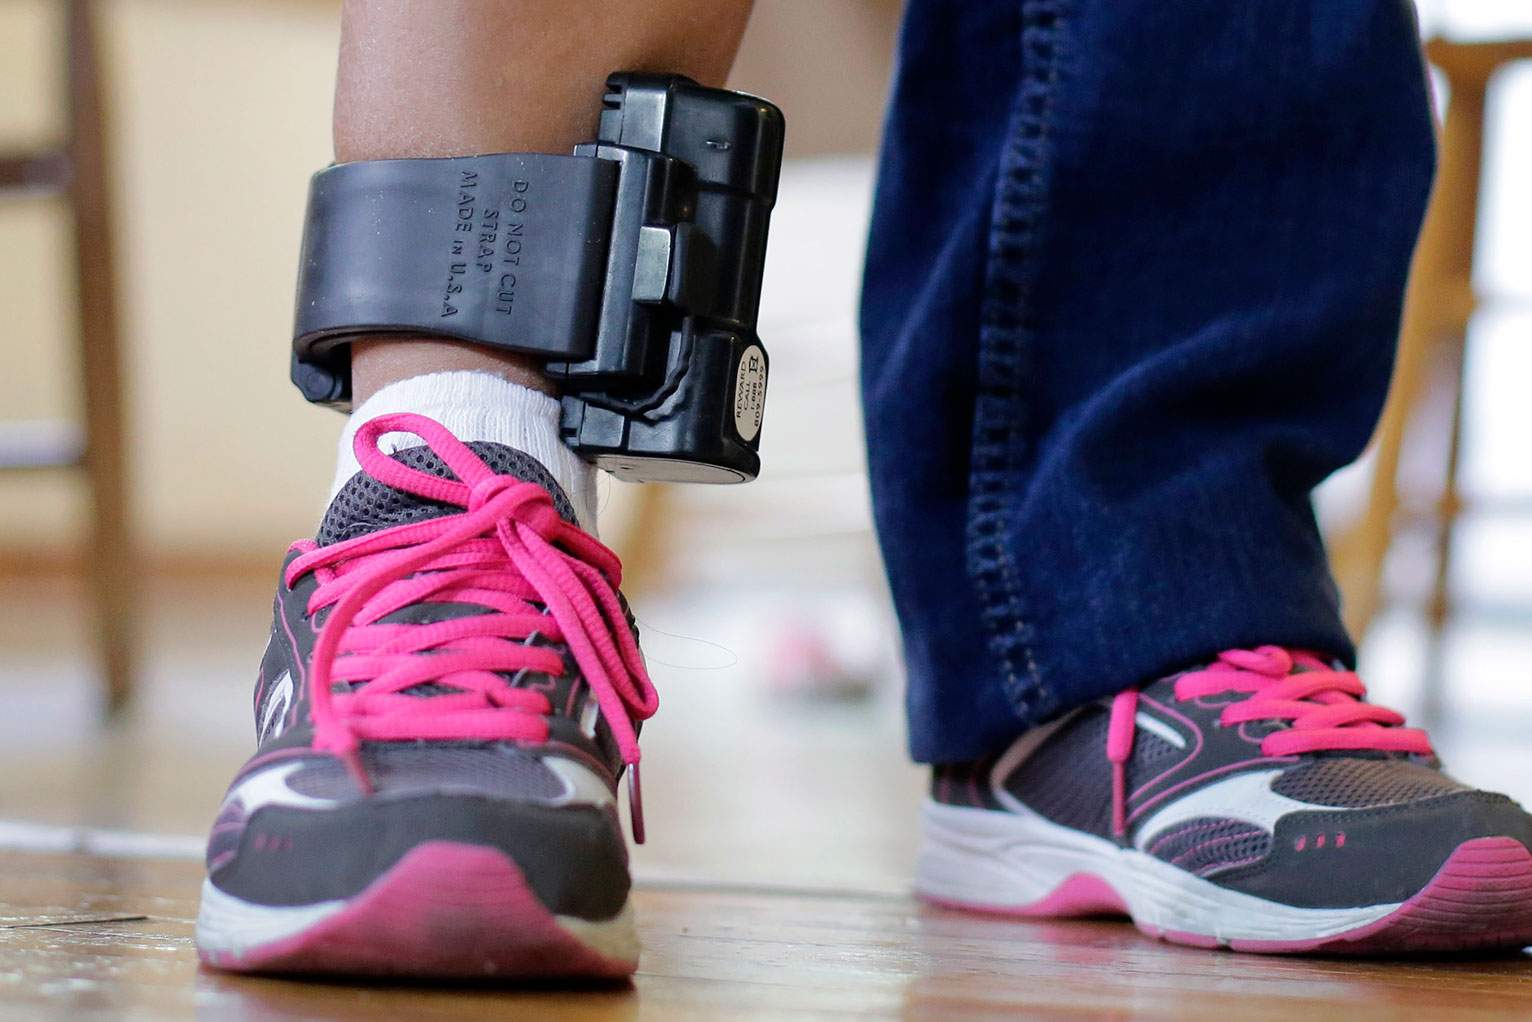 First ever ankle monitoring bracelet used in bail case